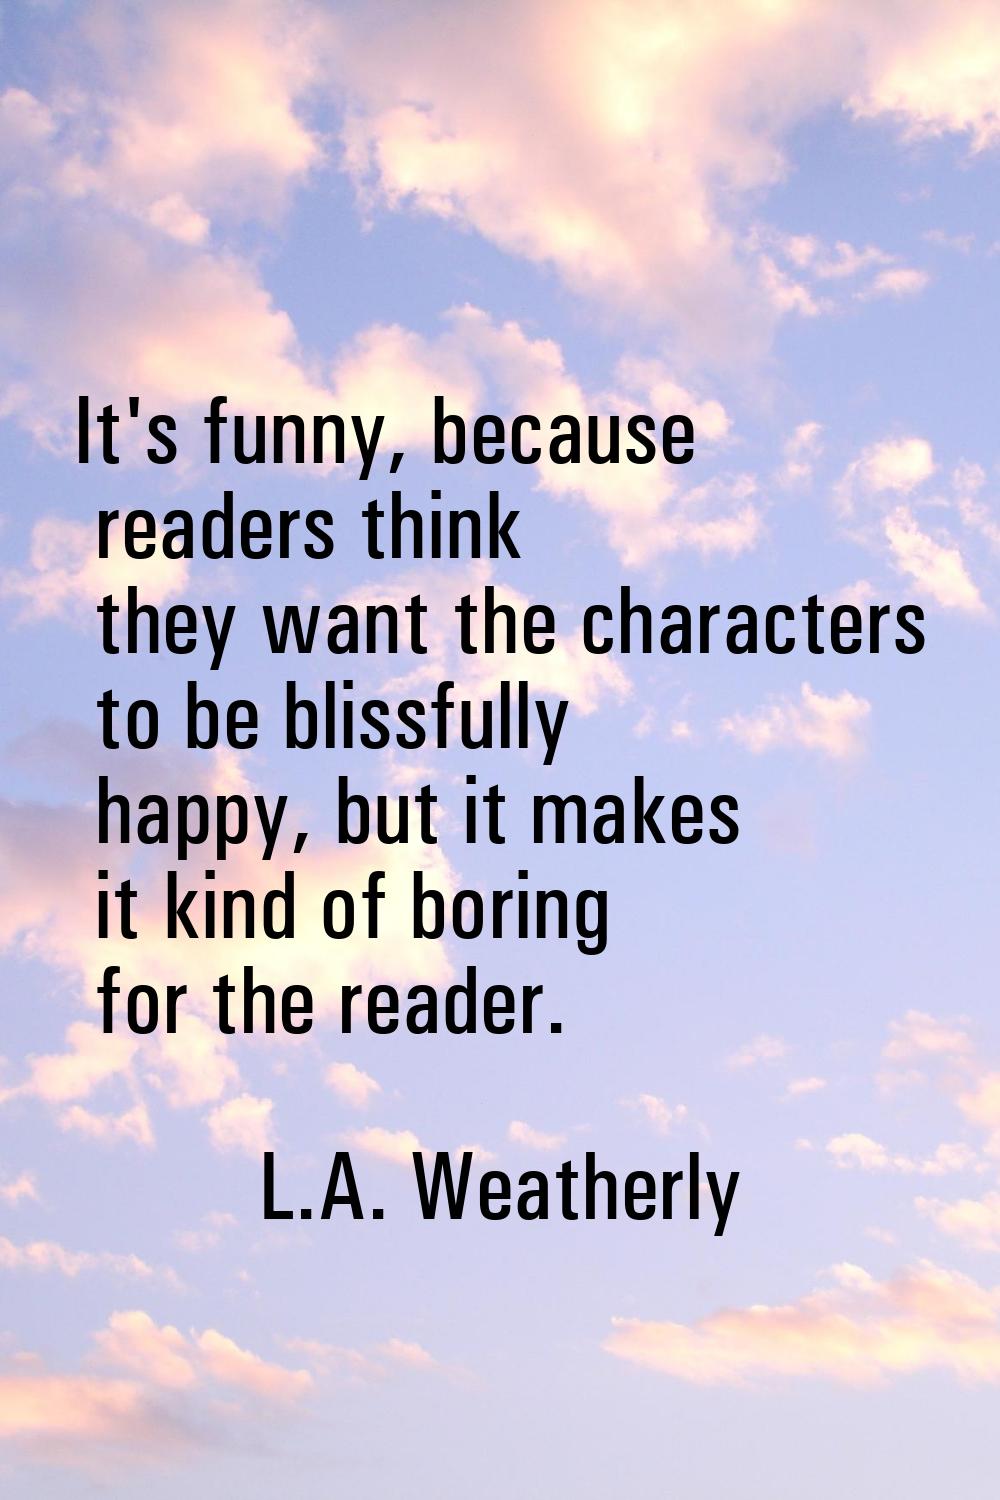 It's funny, because readers think they want the characters to be blissfully happy, but it makes it 